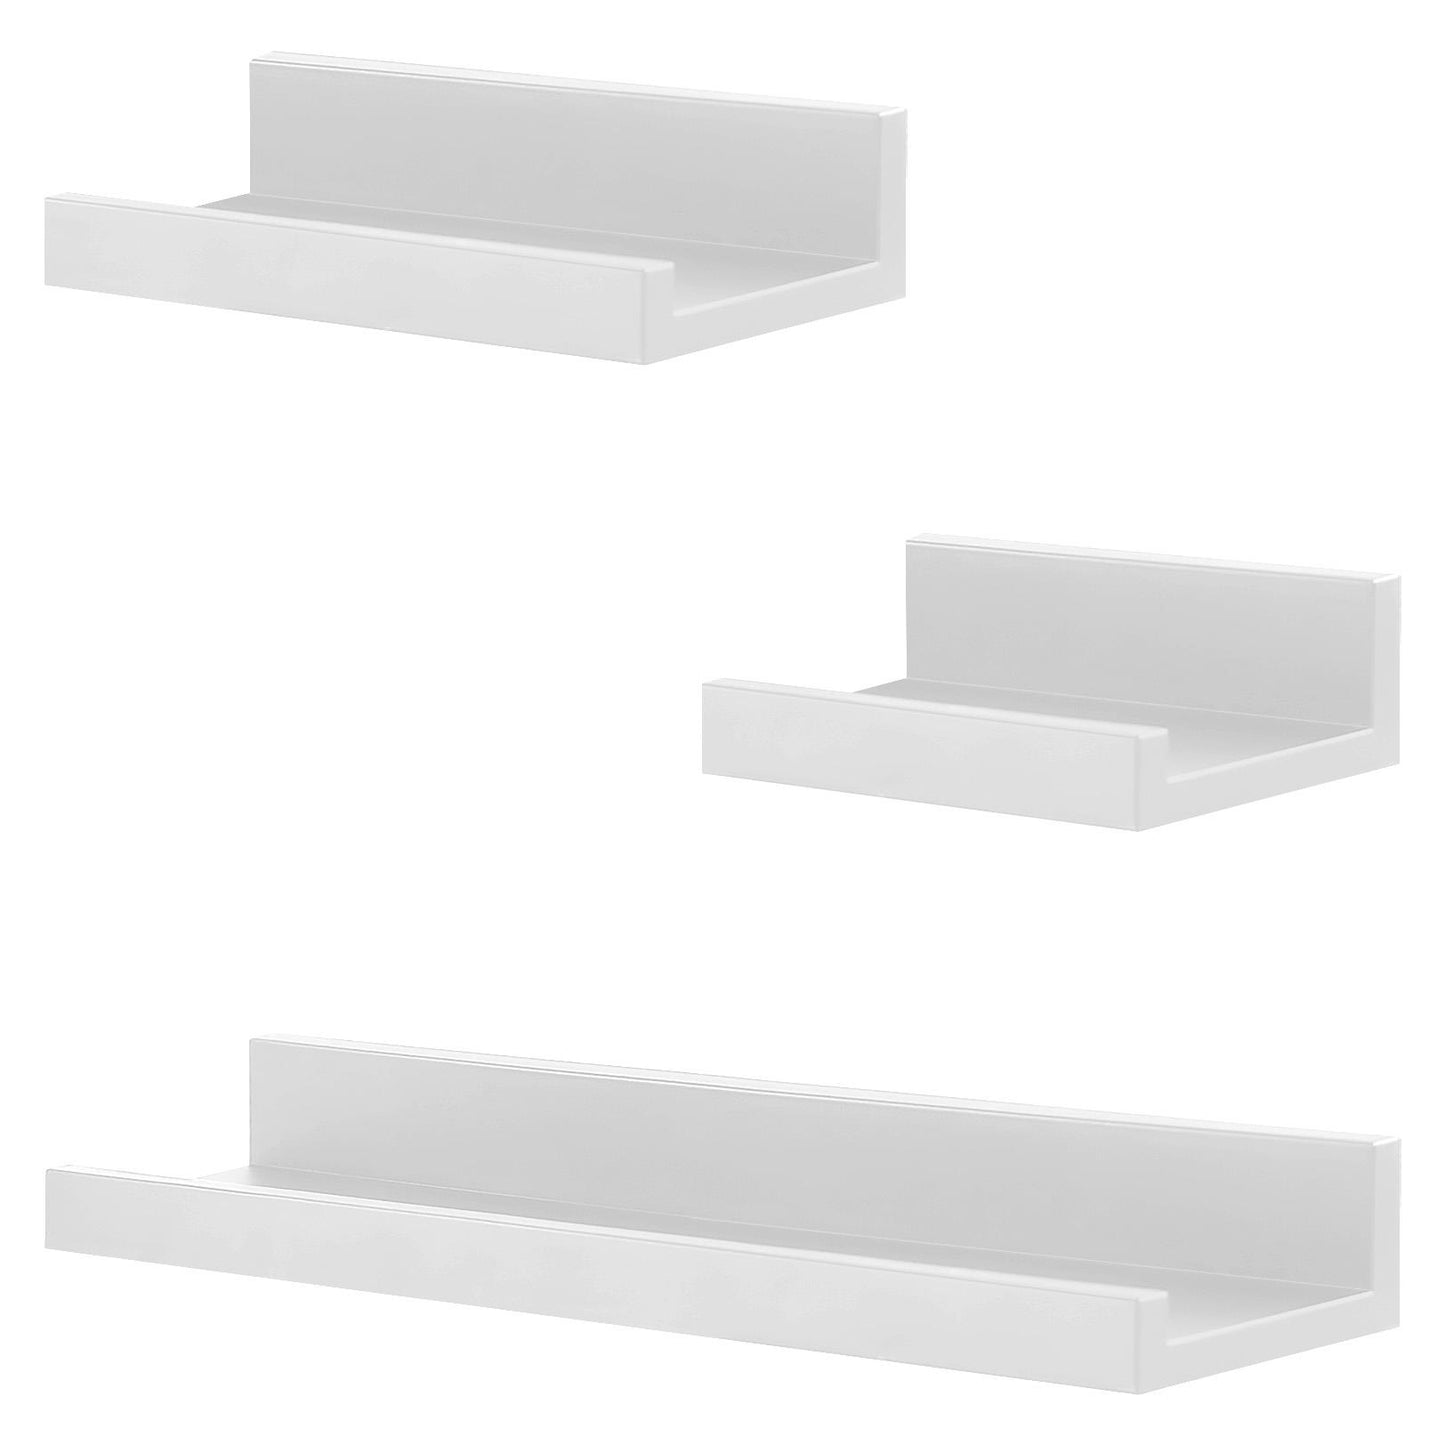 White Floating Wall Shelves Set of 3 by GEEZY - UKBuyZone